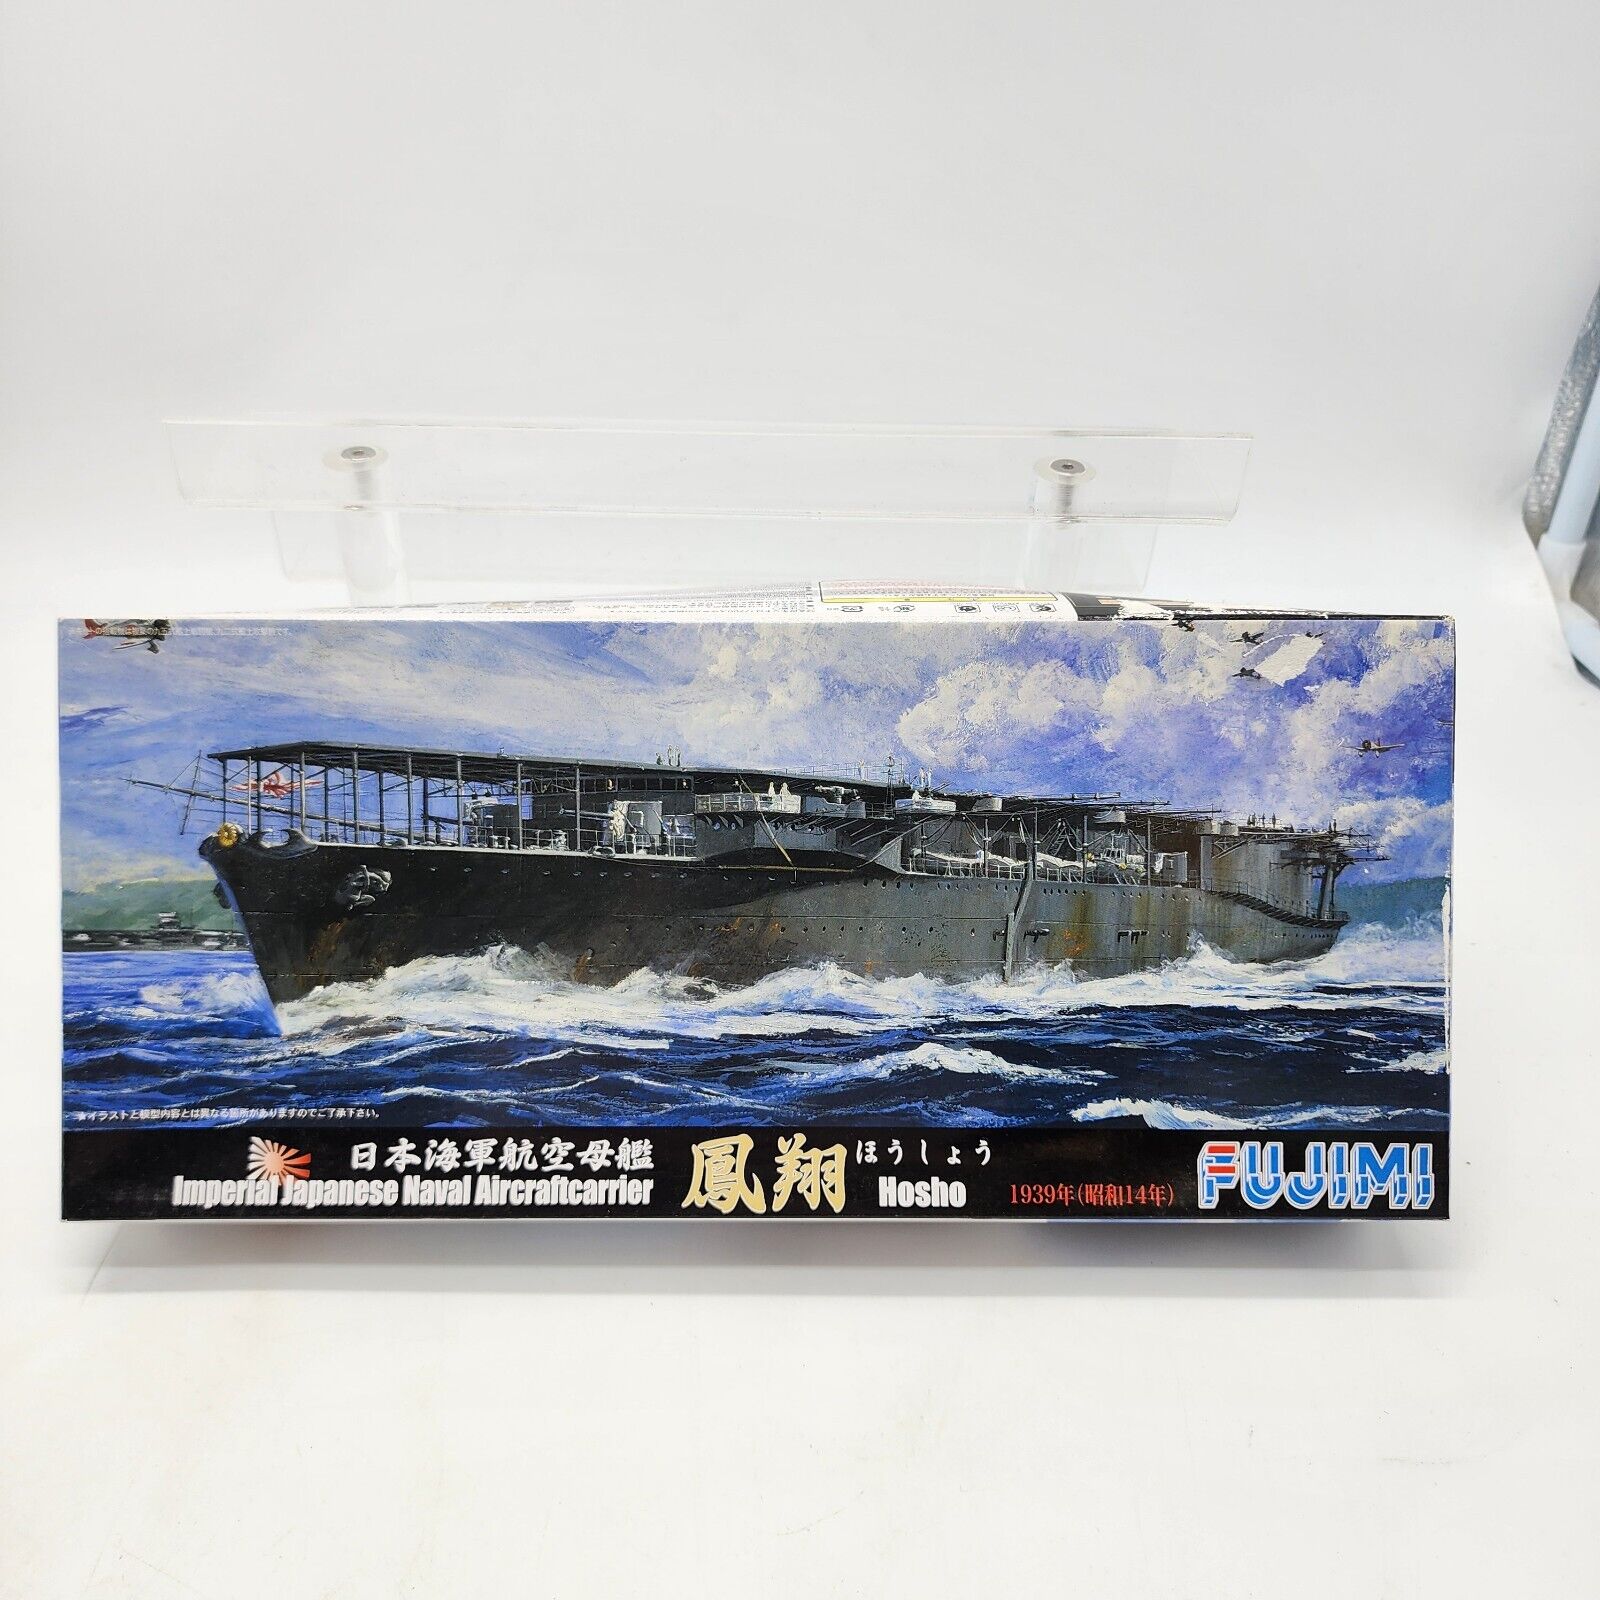 Fujimi model 1/700 431031 No.51 Imperial Japanese Navy Aircraftcarrier HOSHO New